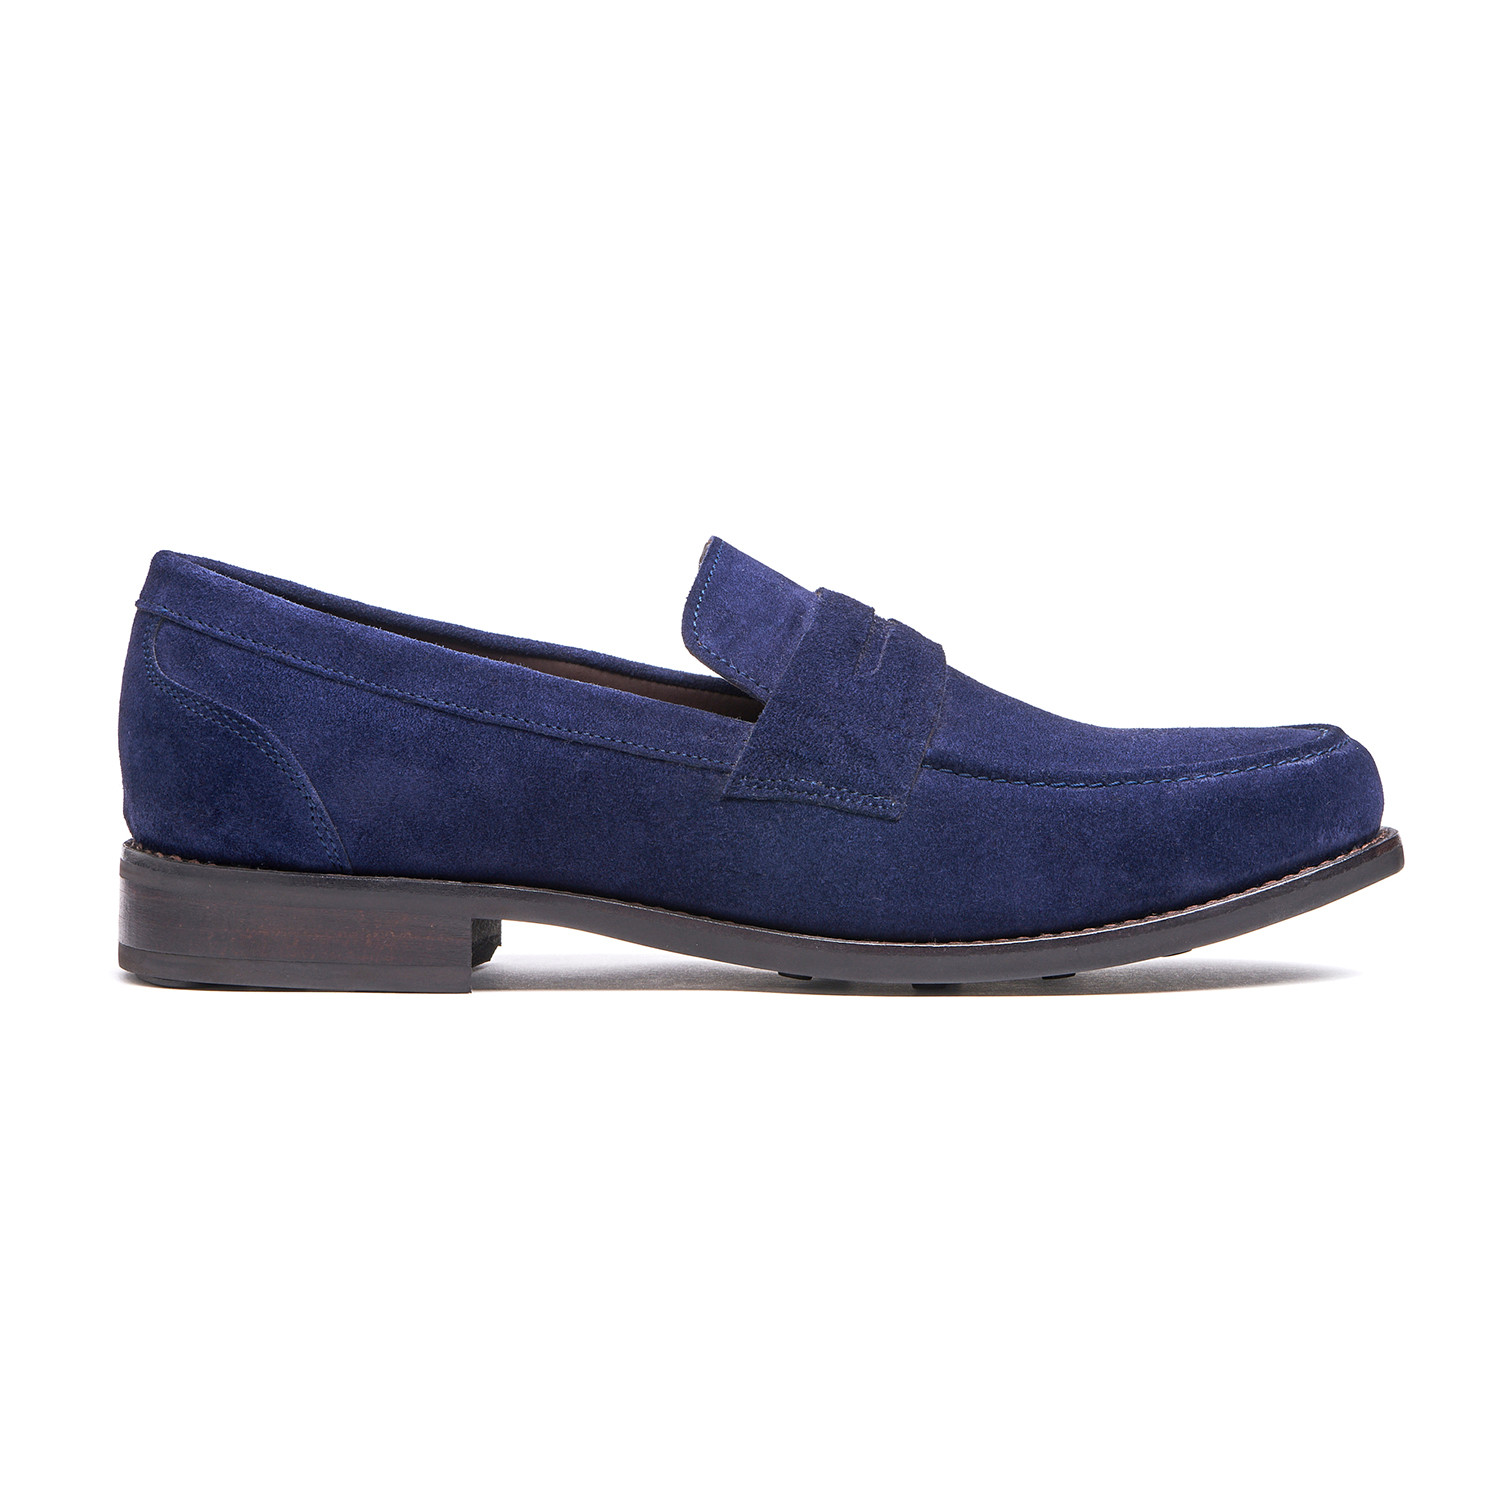 Blue Suede Penny Loafer // Goodyear Welted Construction // Royal Blue ...